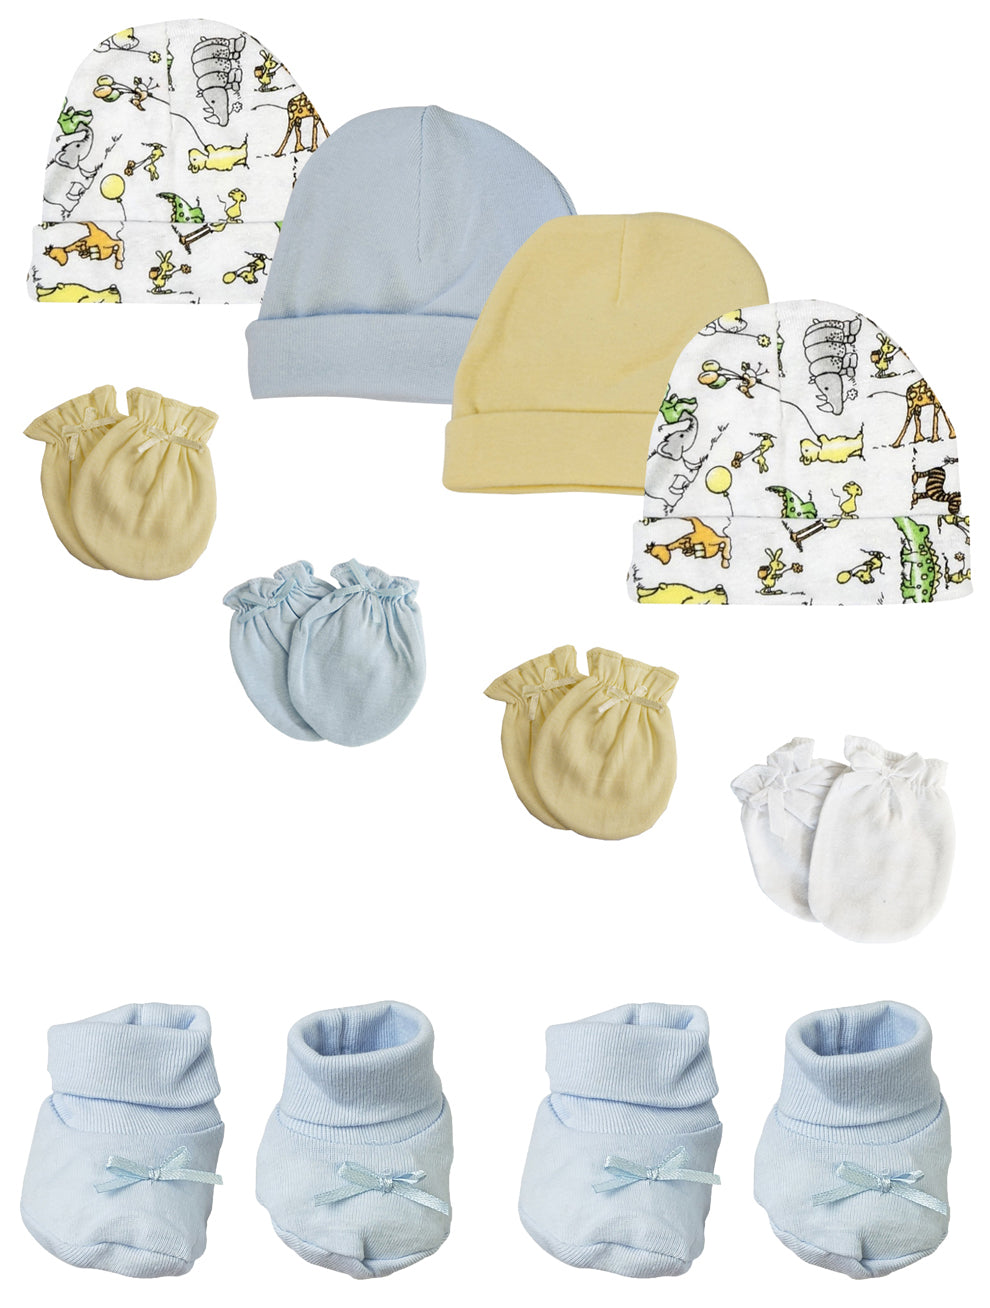 Preemie Baby Boy Caps with Infant Mittens and Booties - 10 Pack NC_0210